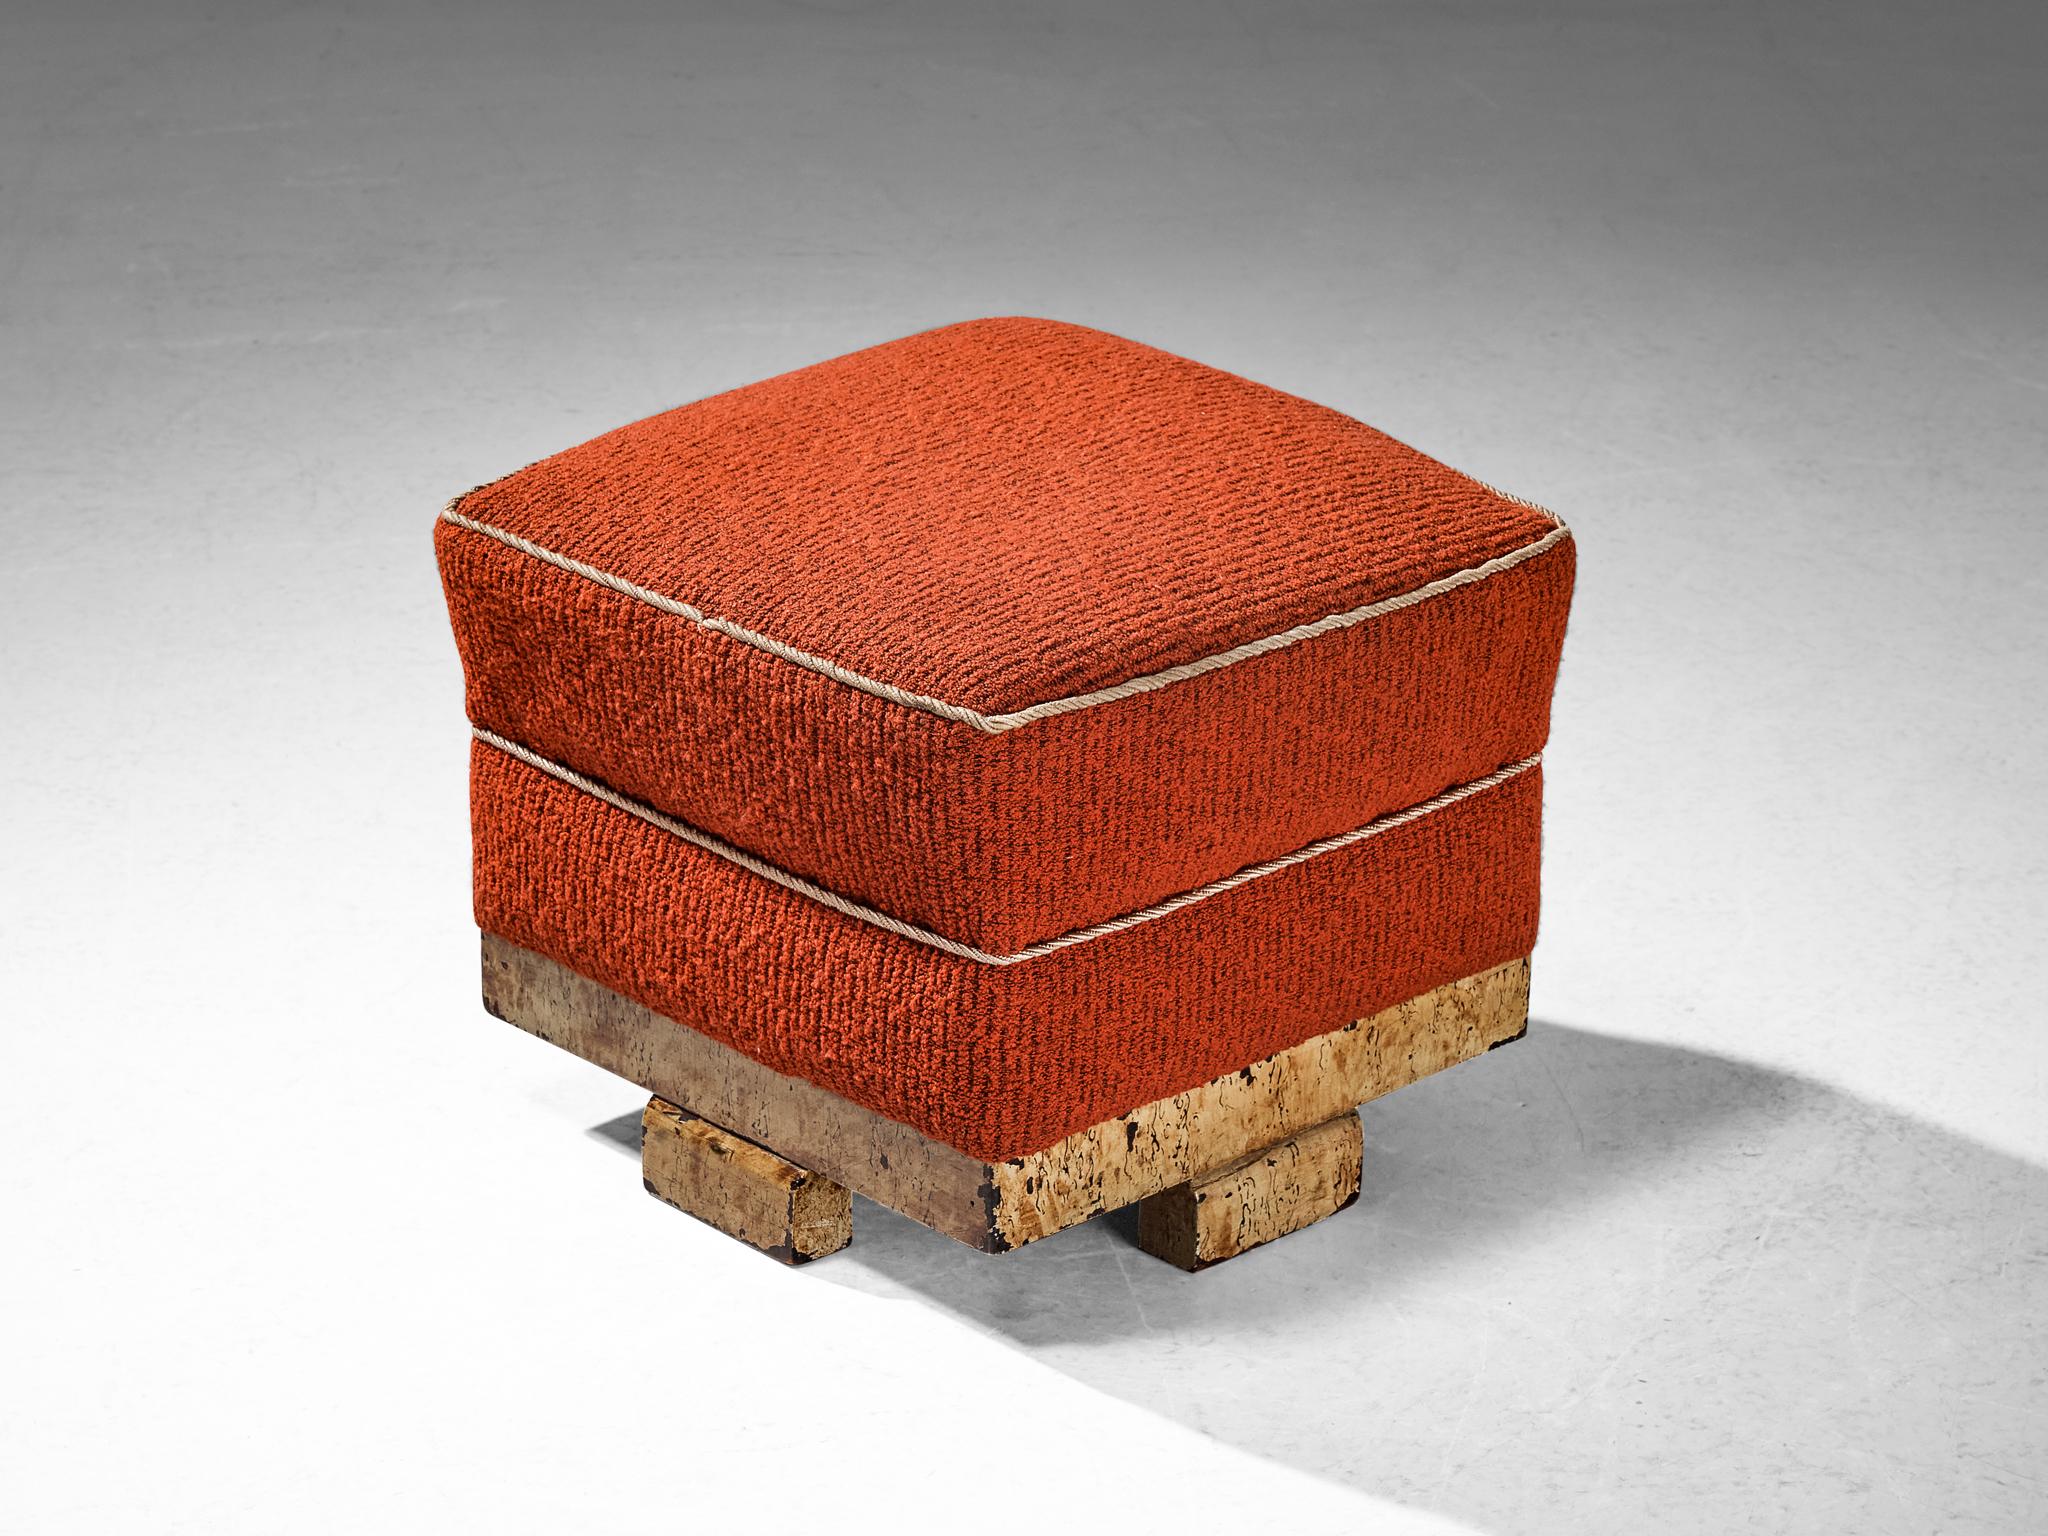 Jindrich Halabala for UP Závody, footstool, tabouret, ottoman, poof or stool, fabric, wood, Czech Republic, 1930s

This pouf or footstool is designed by Jindrich Halabala in the 1930s when the Art Deco Period was at its highest point and